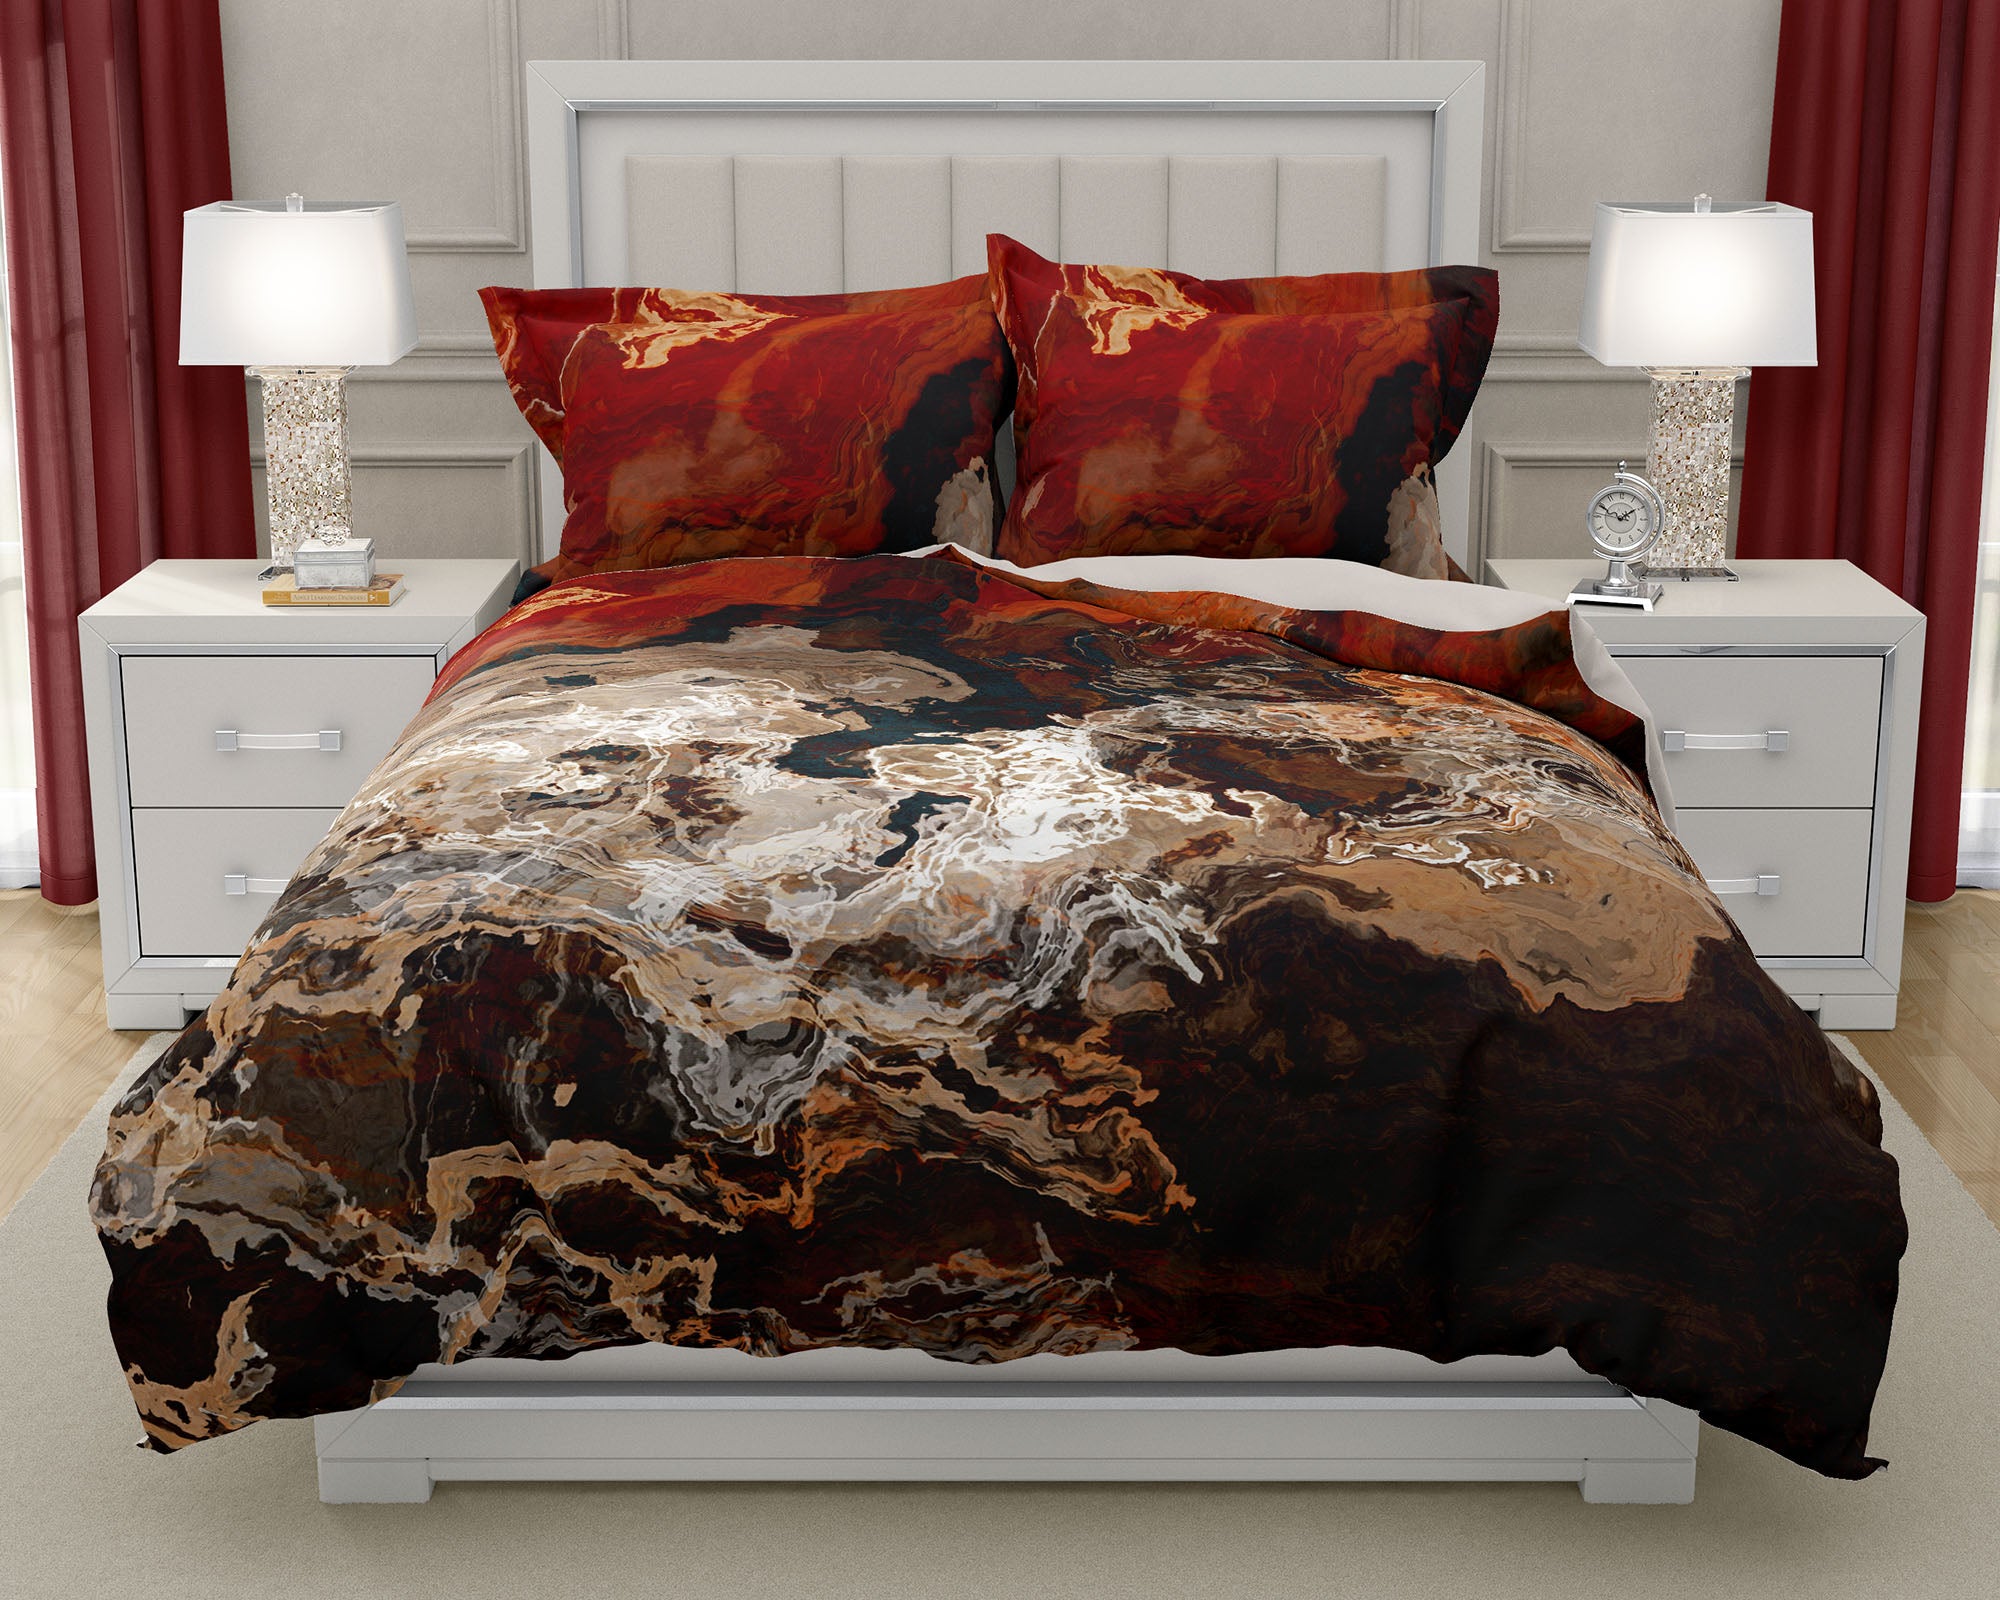 Duvet Cover With Abstract Art King Or Queen In Dark Red And Cream